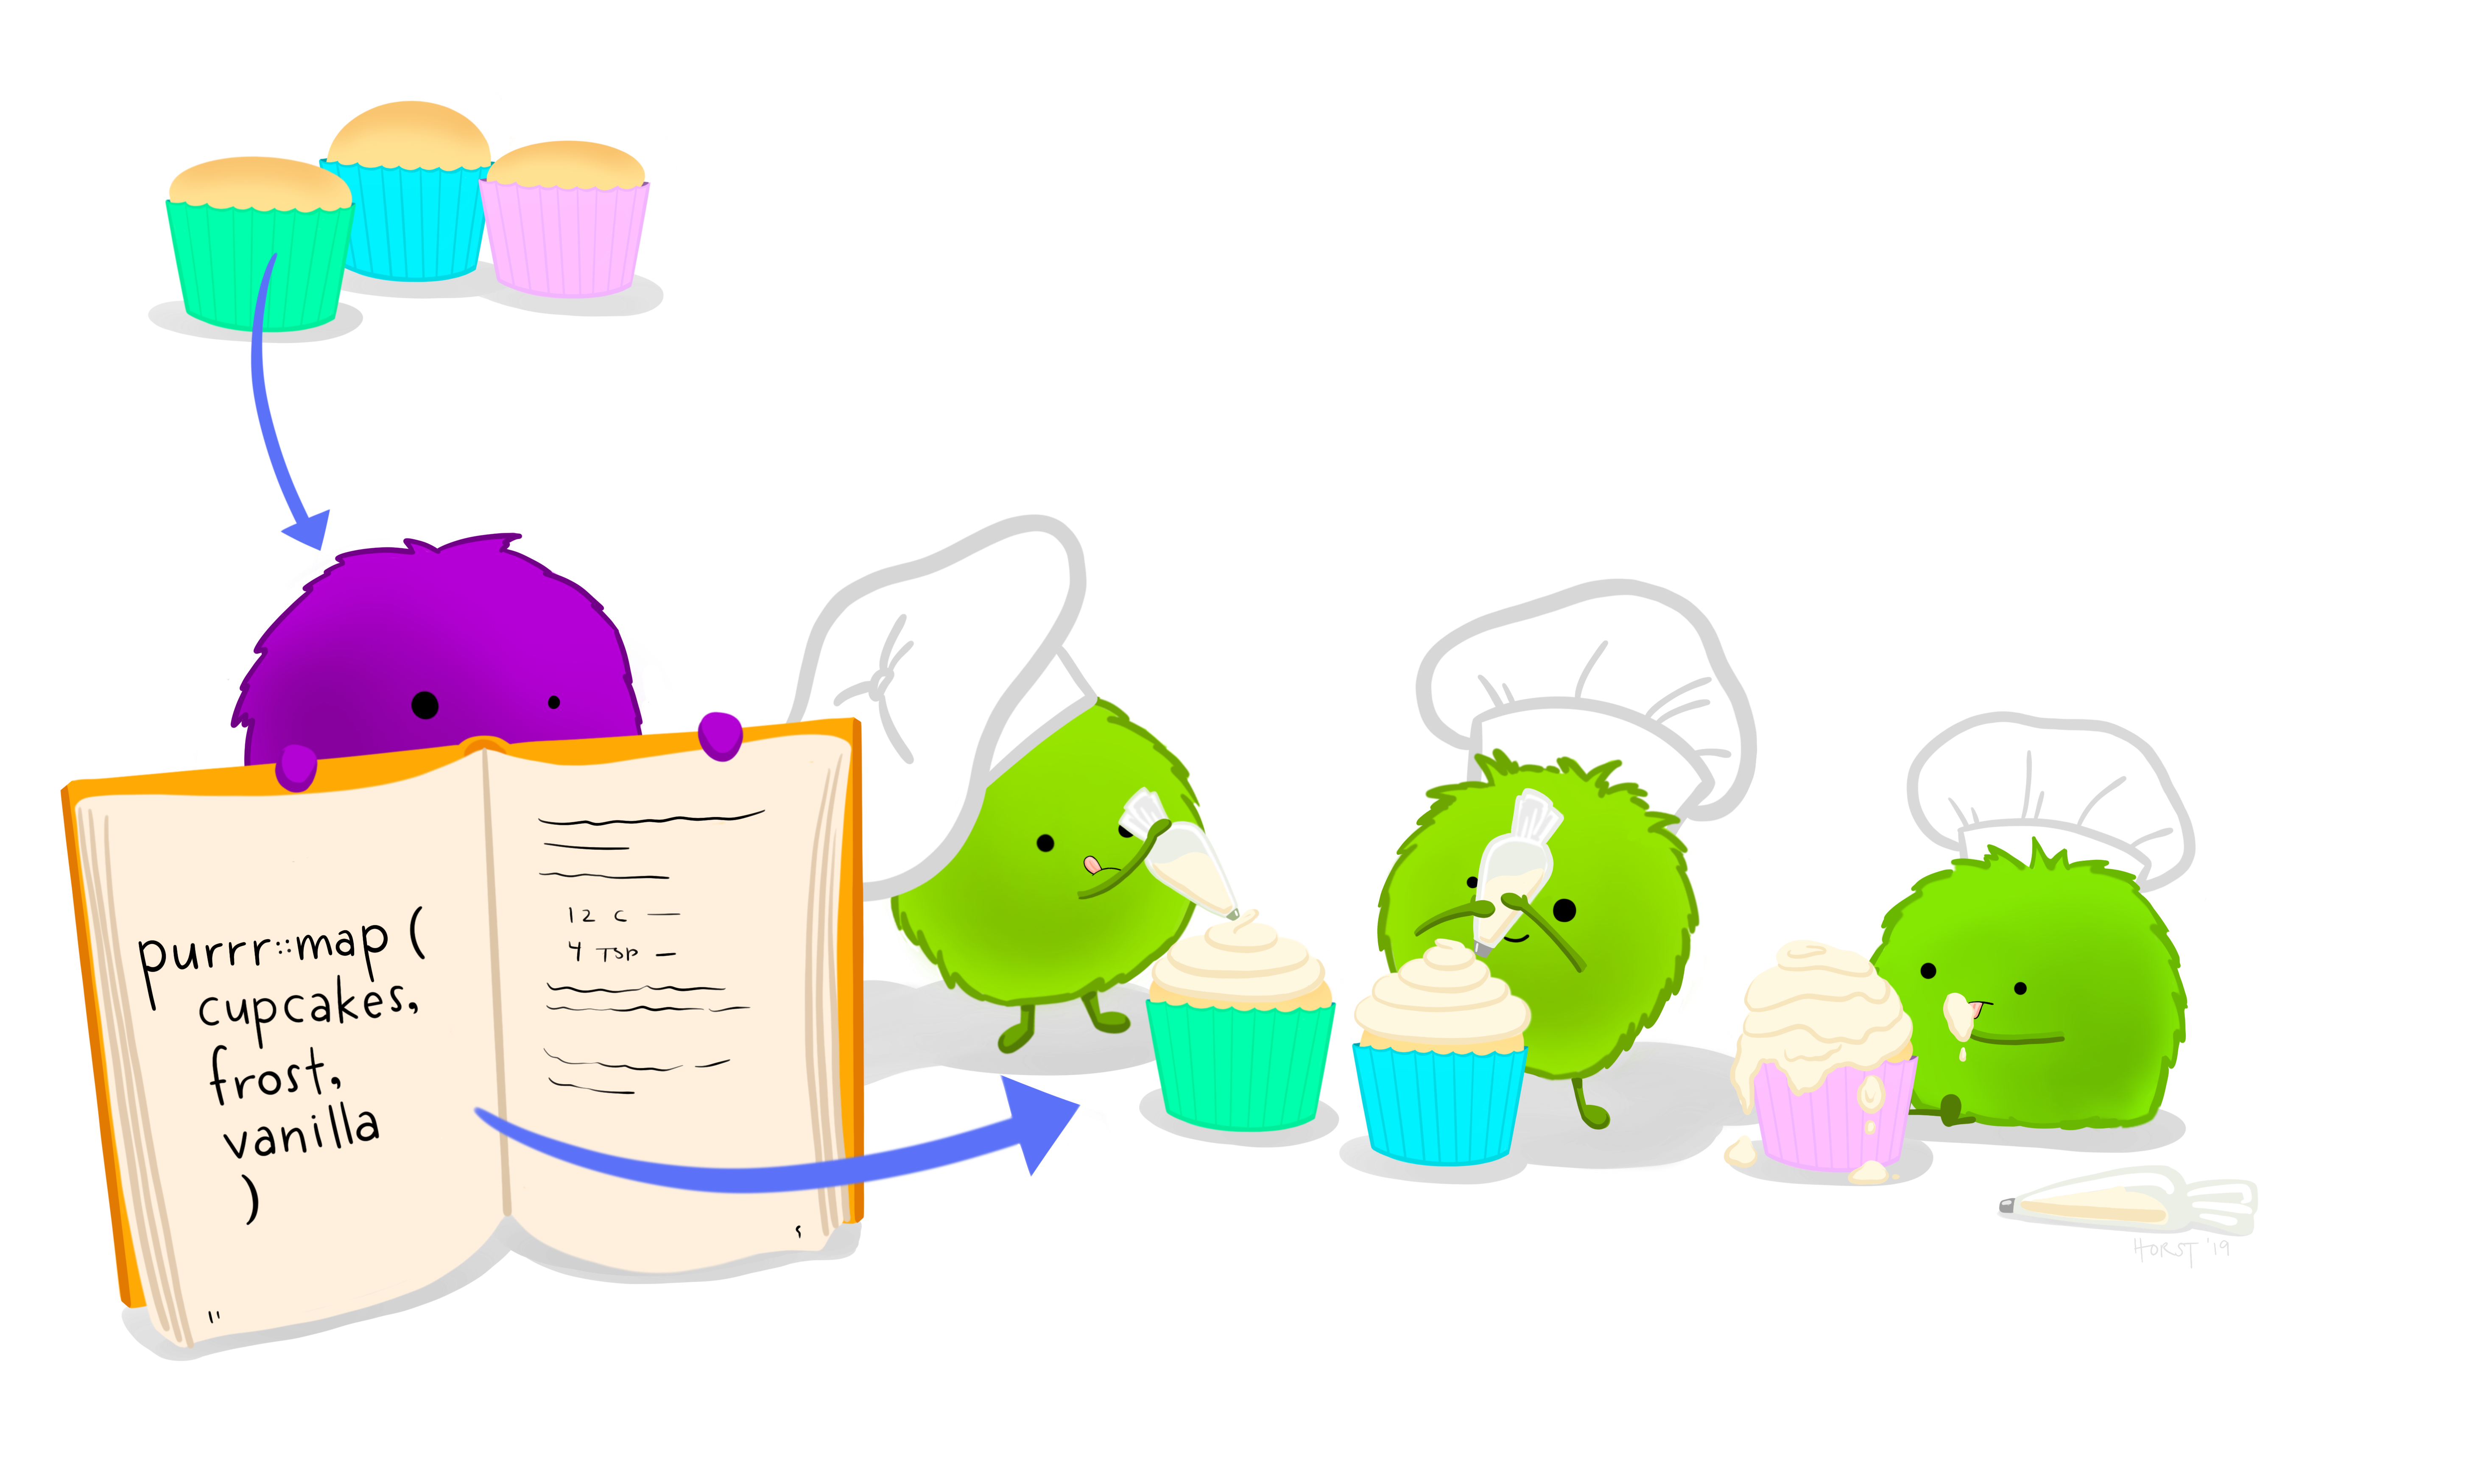 Three green fuzzy monsters in chef hats frosting cupcakes with the same vanilla frosting. A purple fuzzy monster to the side holds a recipe book containing code that would automate the cupcake frosting process.